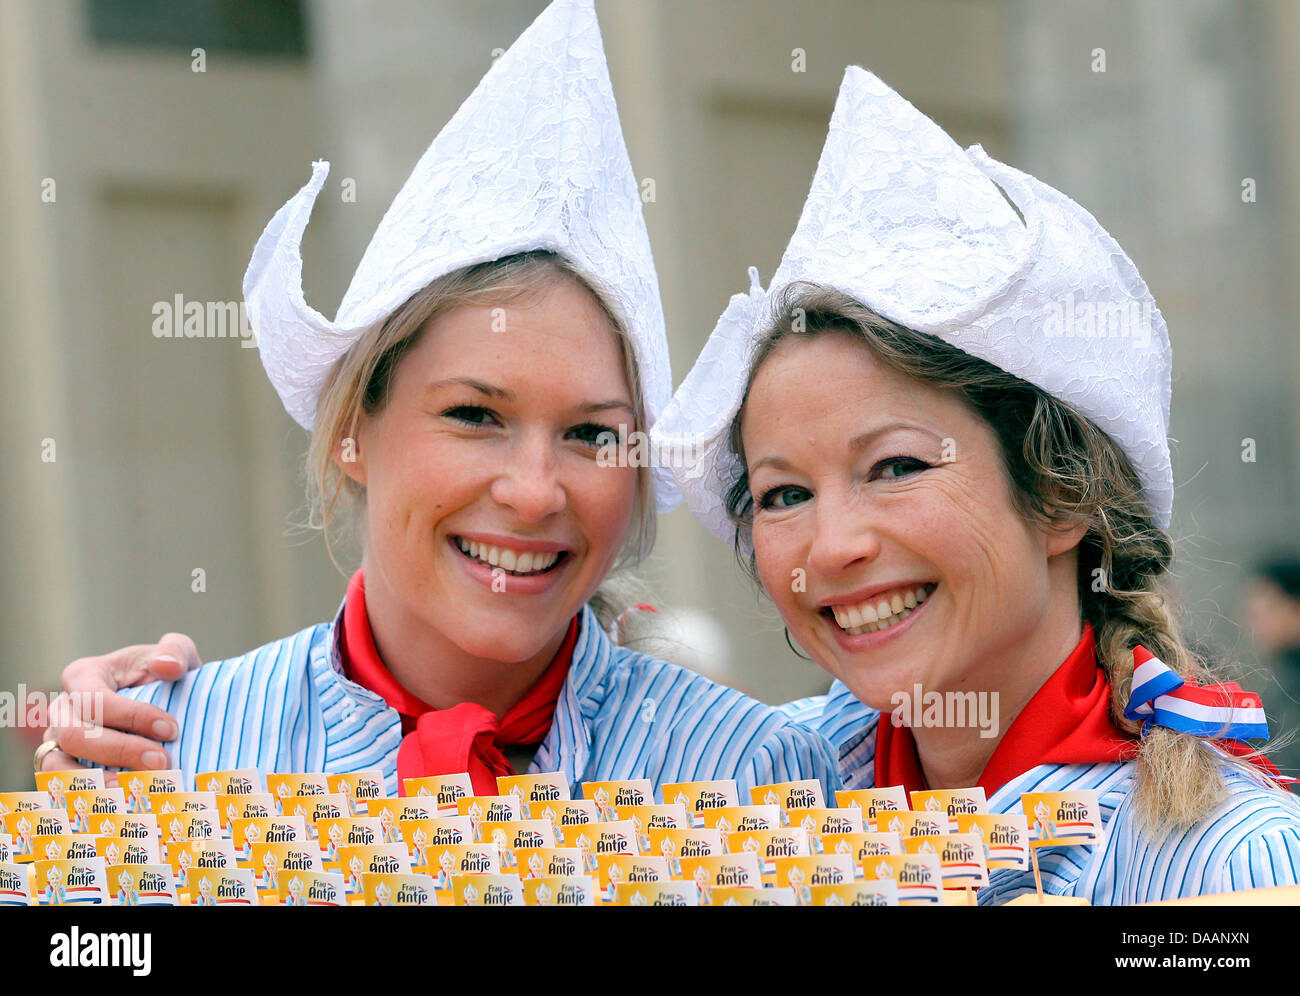 On the occasion of the world's biggest fair for food, agriculture and hortriculture, the International Green Week Berlin, Mandy Smits (L) presents fresh Gouda with her predecessor Madeleen Driessen at the Brandenburg Gate in Berlin, Germany, 20 January 2011. The two women are impersonators of the advertising character 'Ms Antje', representing Dutch dairy. The Green Week last from 2 Stock Photo